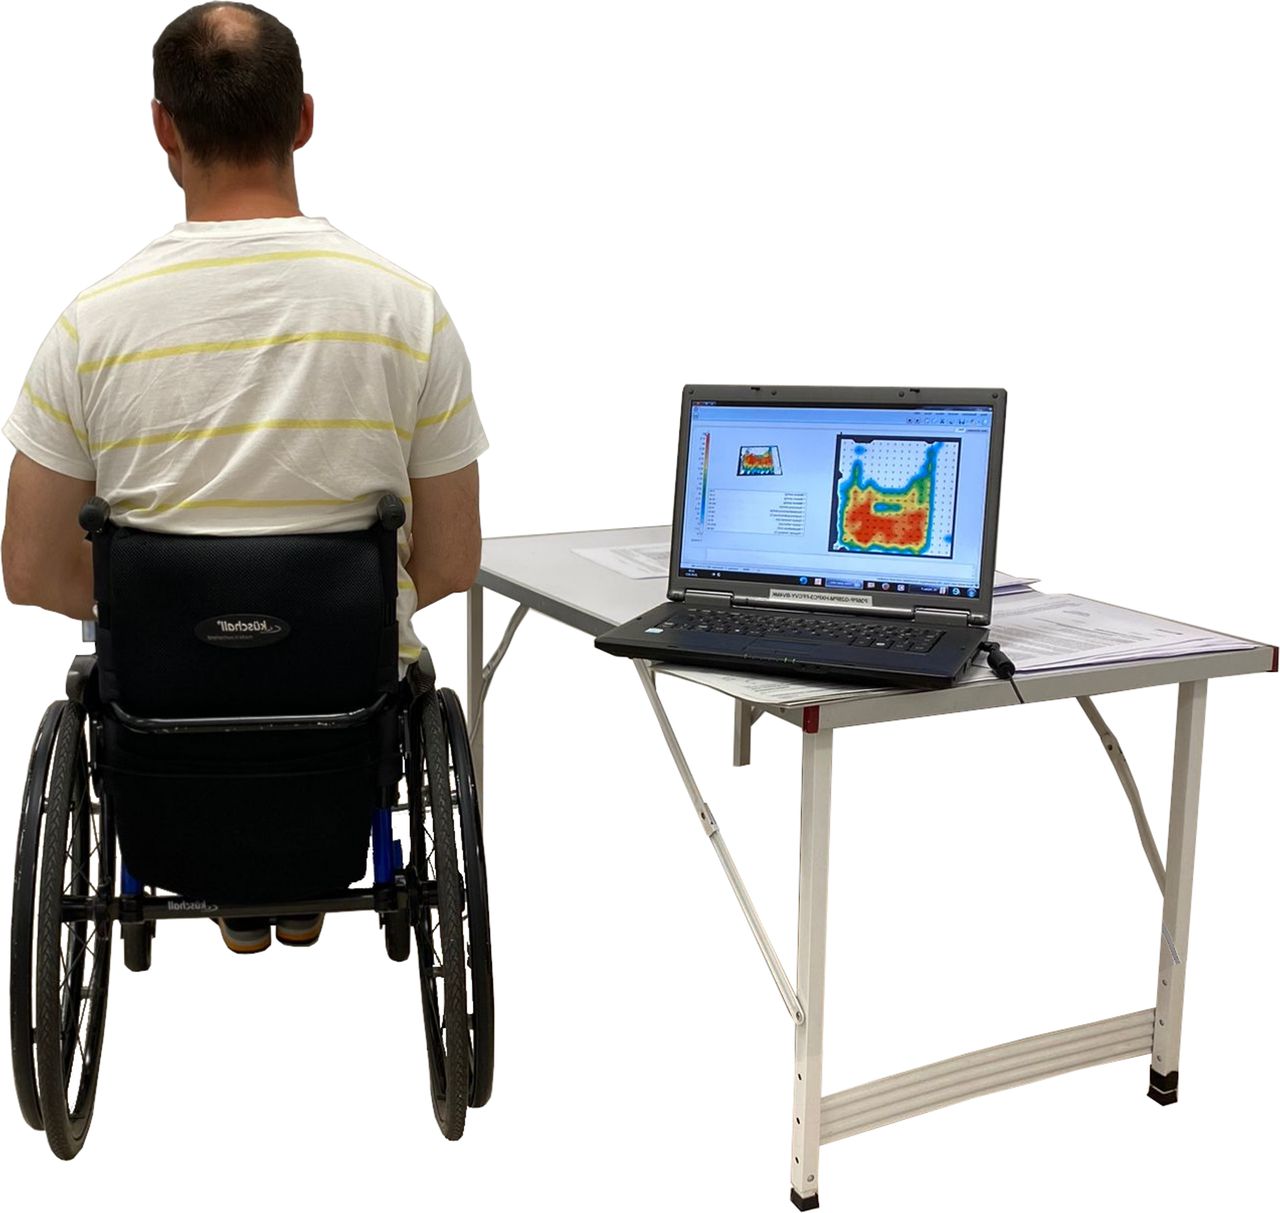 Feedback improves compliance of pressure relief activities in wheelchair  users with spinal cord injury